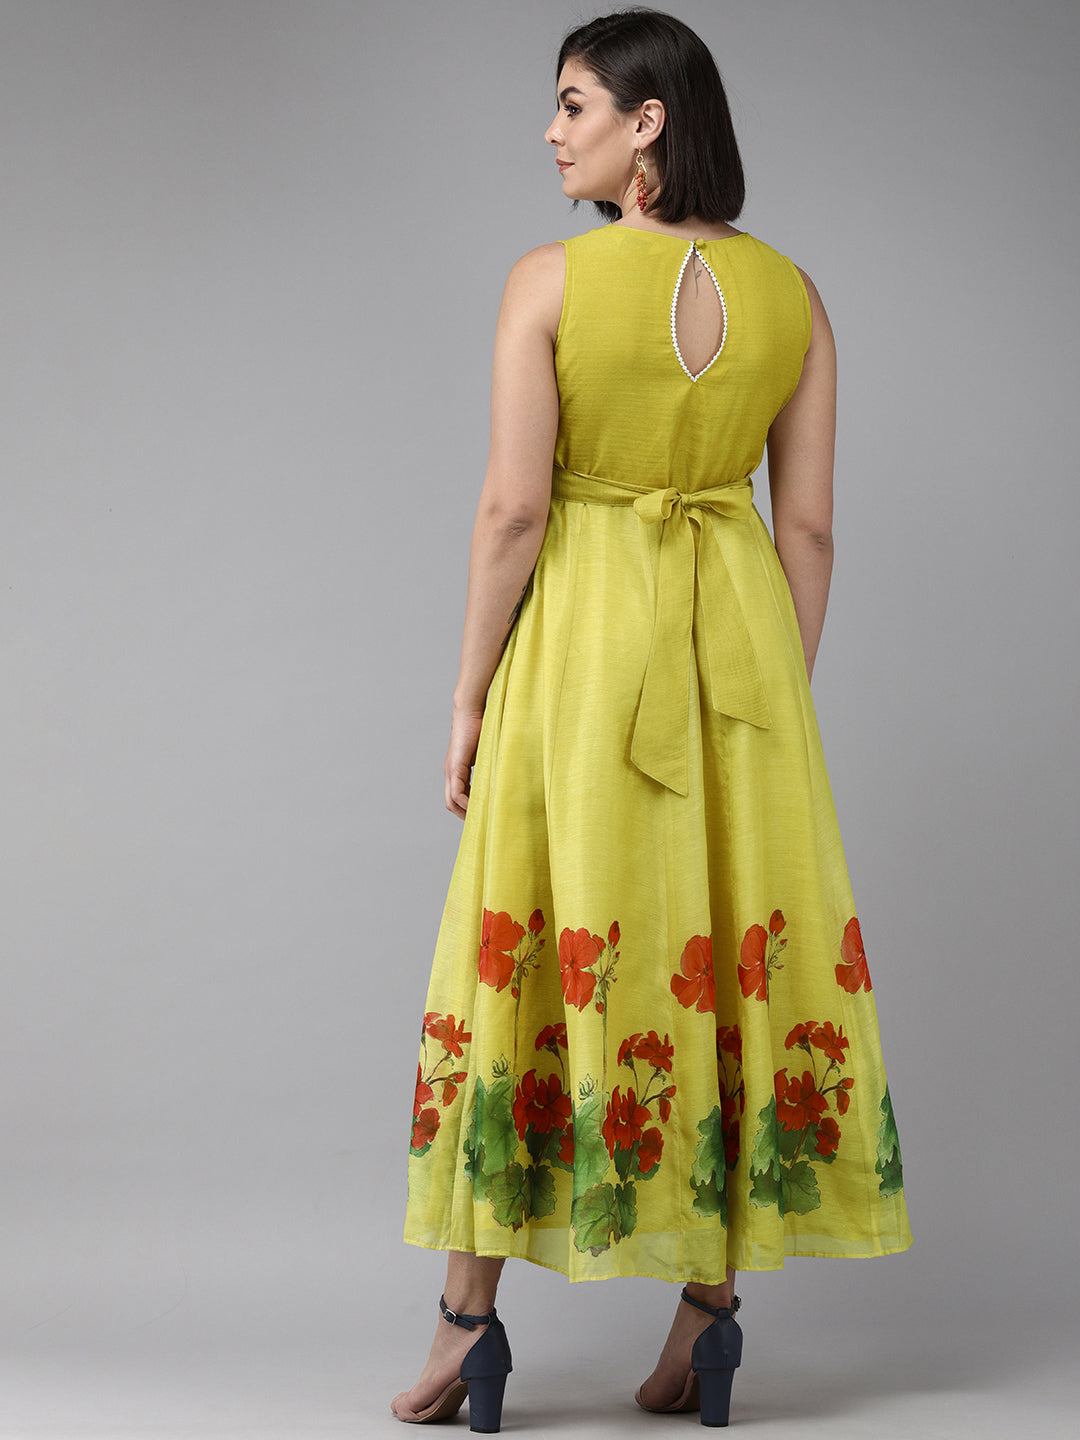 Women's Yellow Floral Chanderi Silk Maxi Dress - Bhama Couture